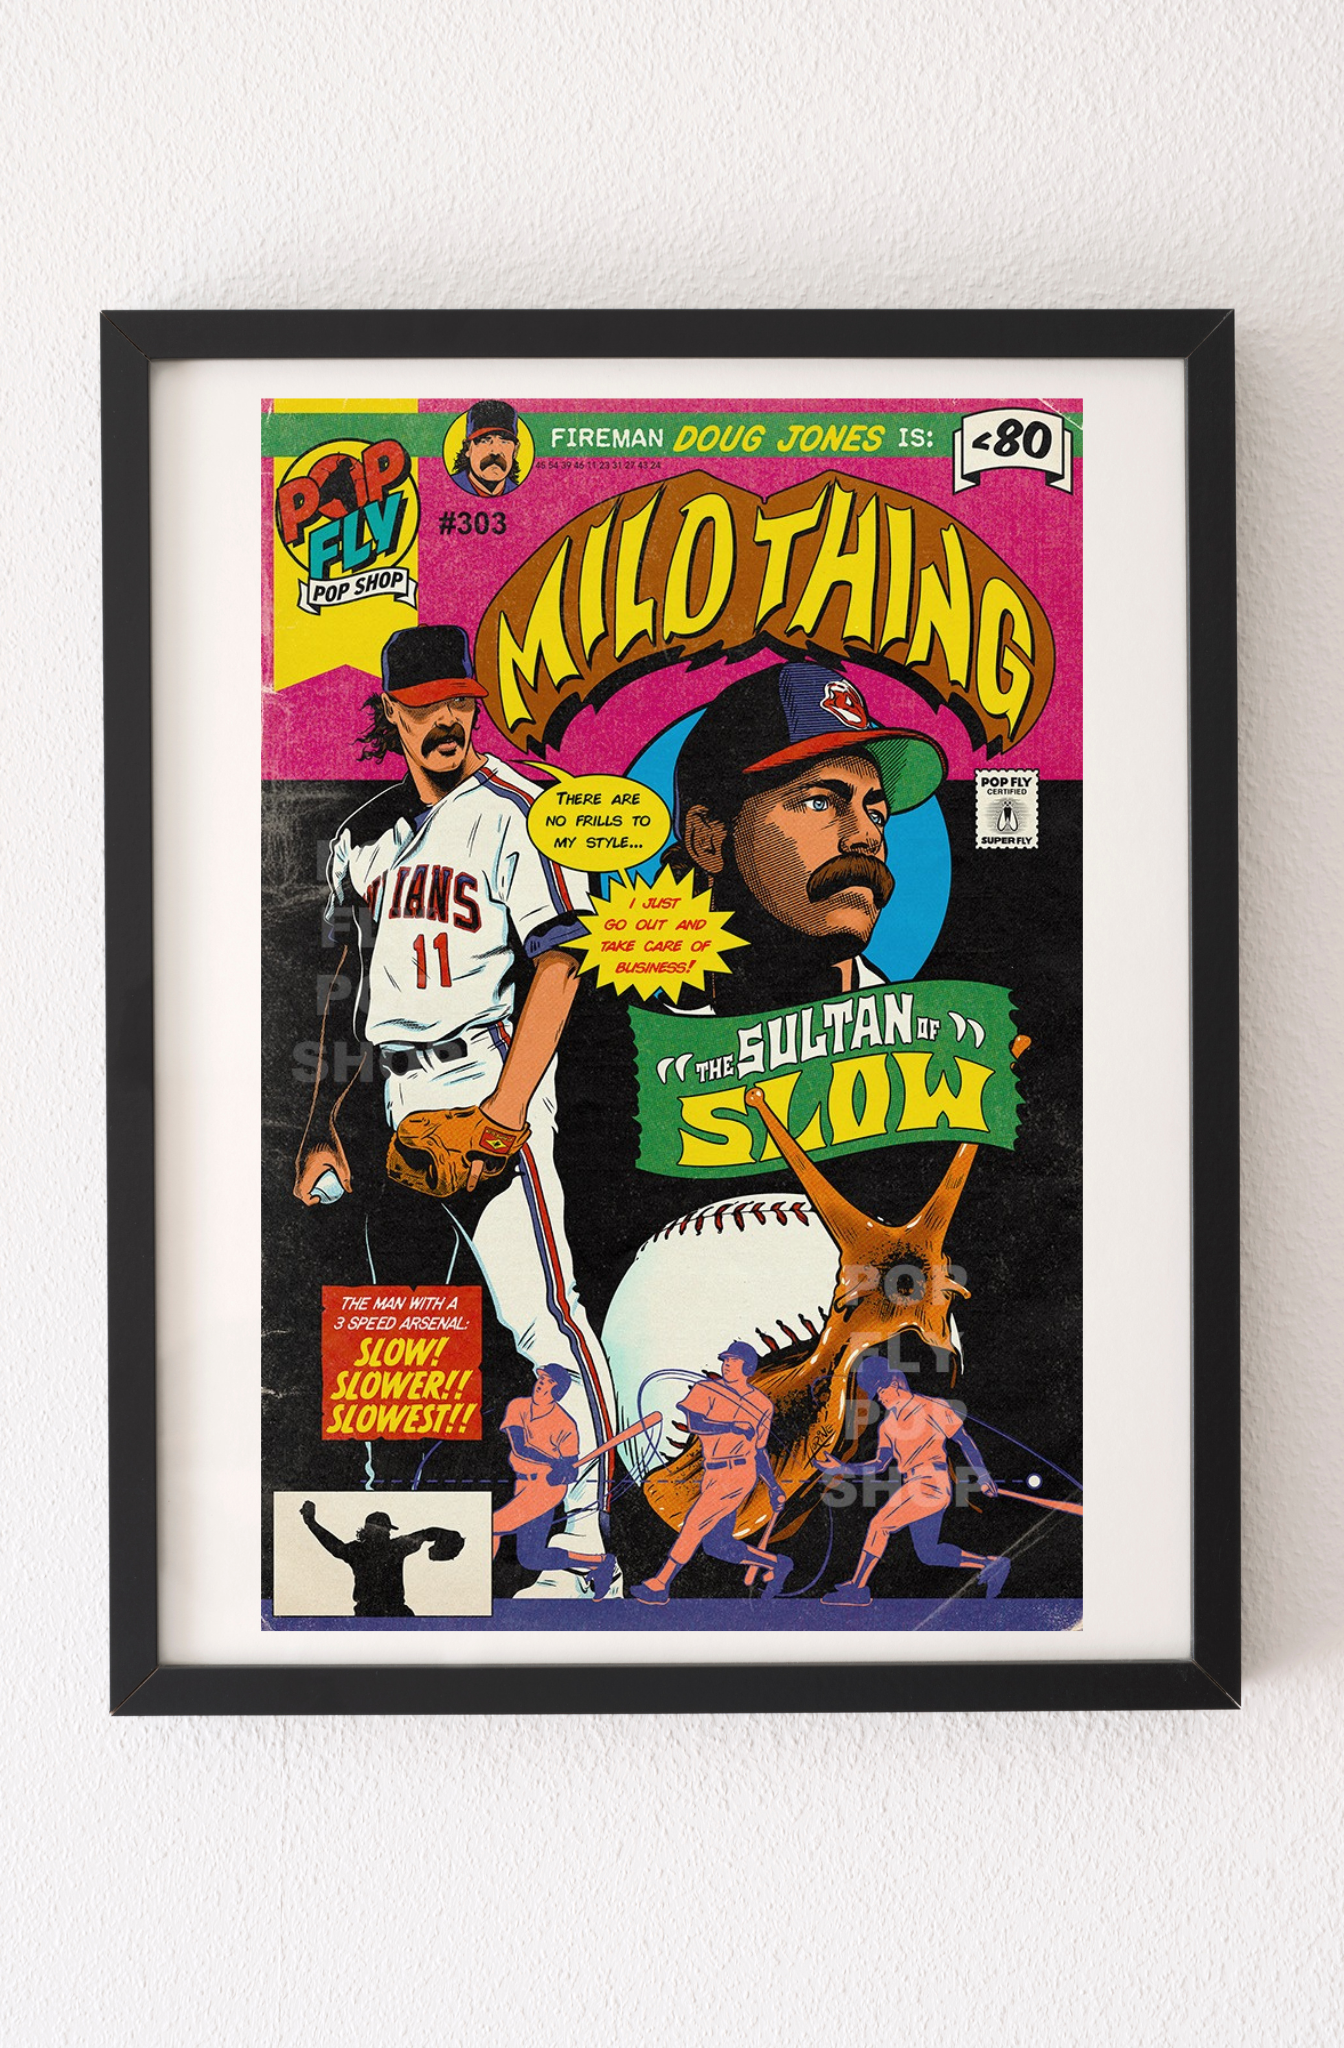 97. (SOLD OUT) "Mild Thing: The Sultan of Slow" 7" x 10.5" Art Print